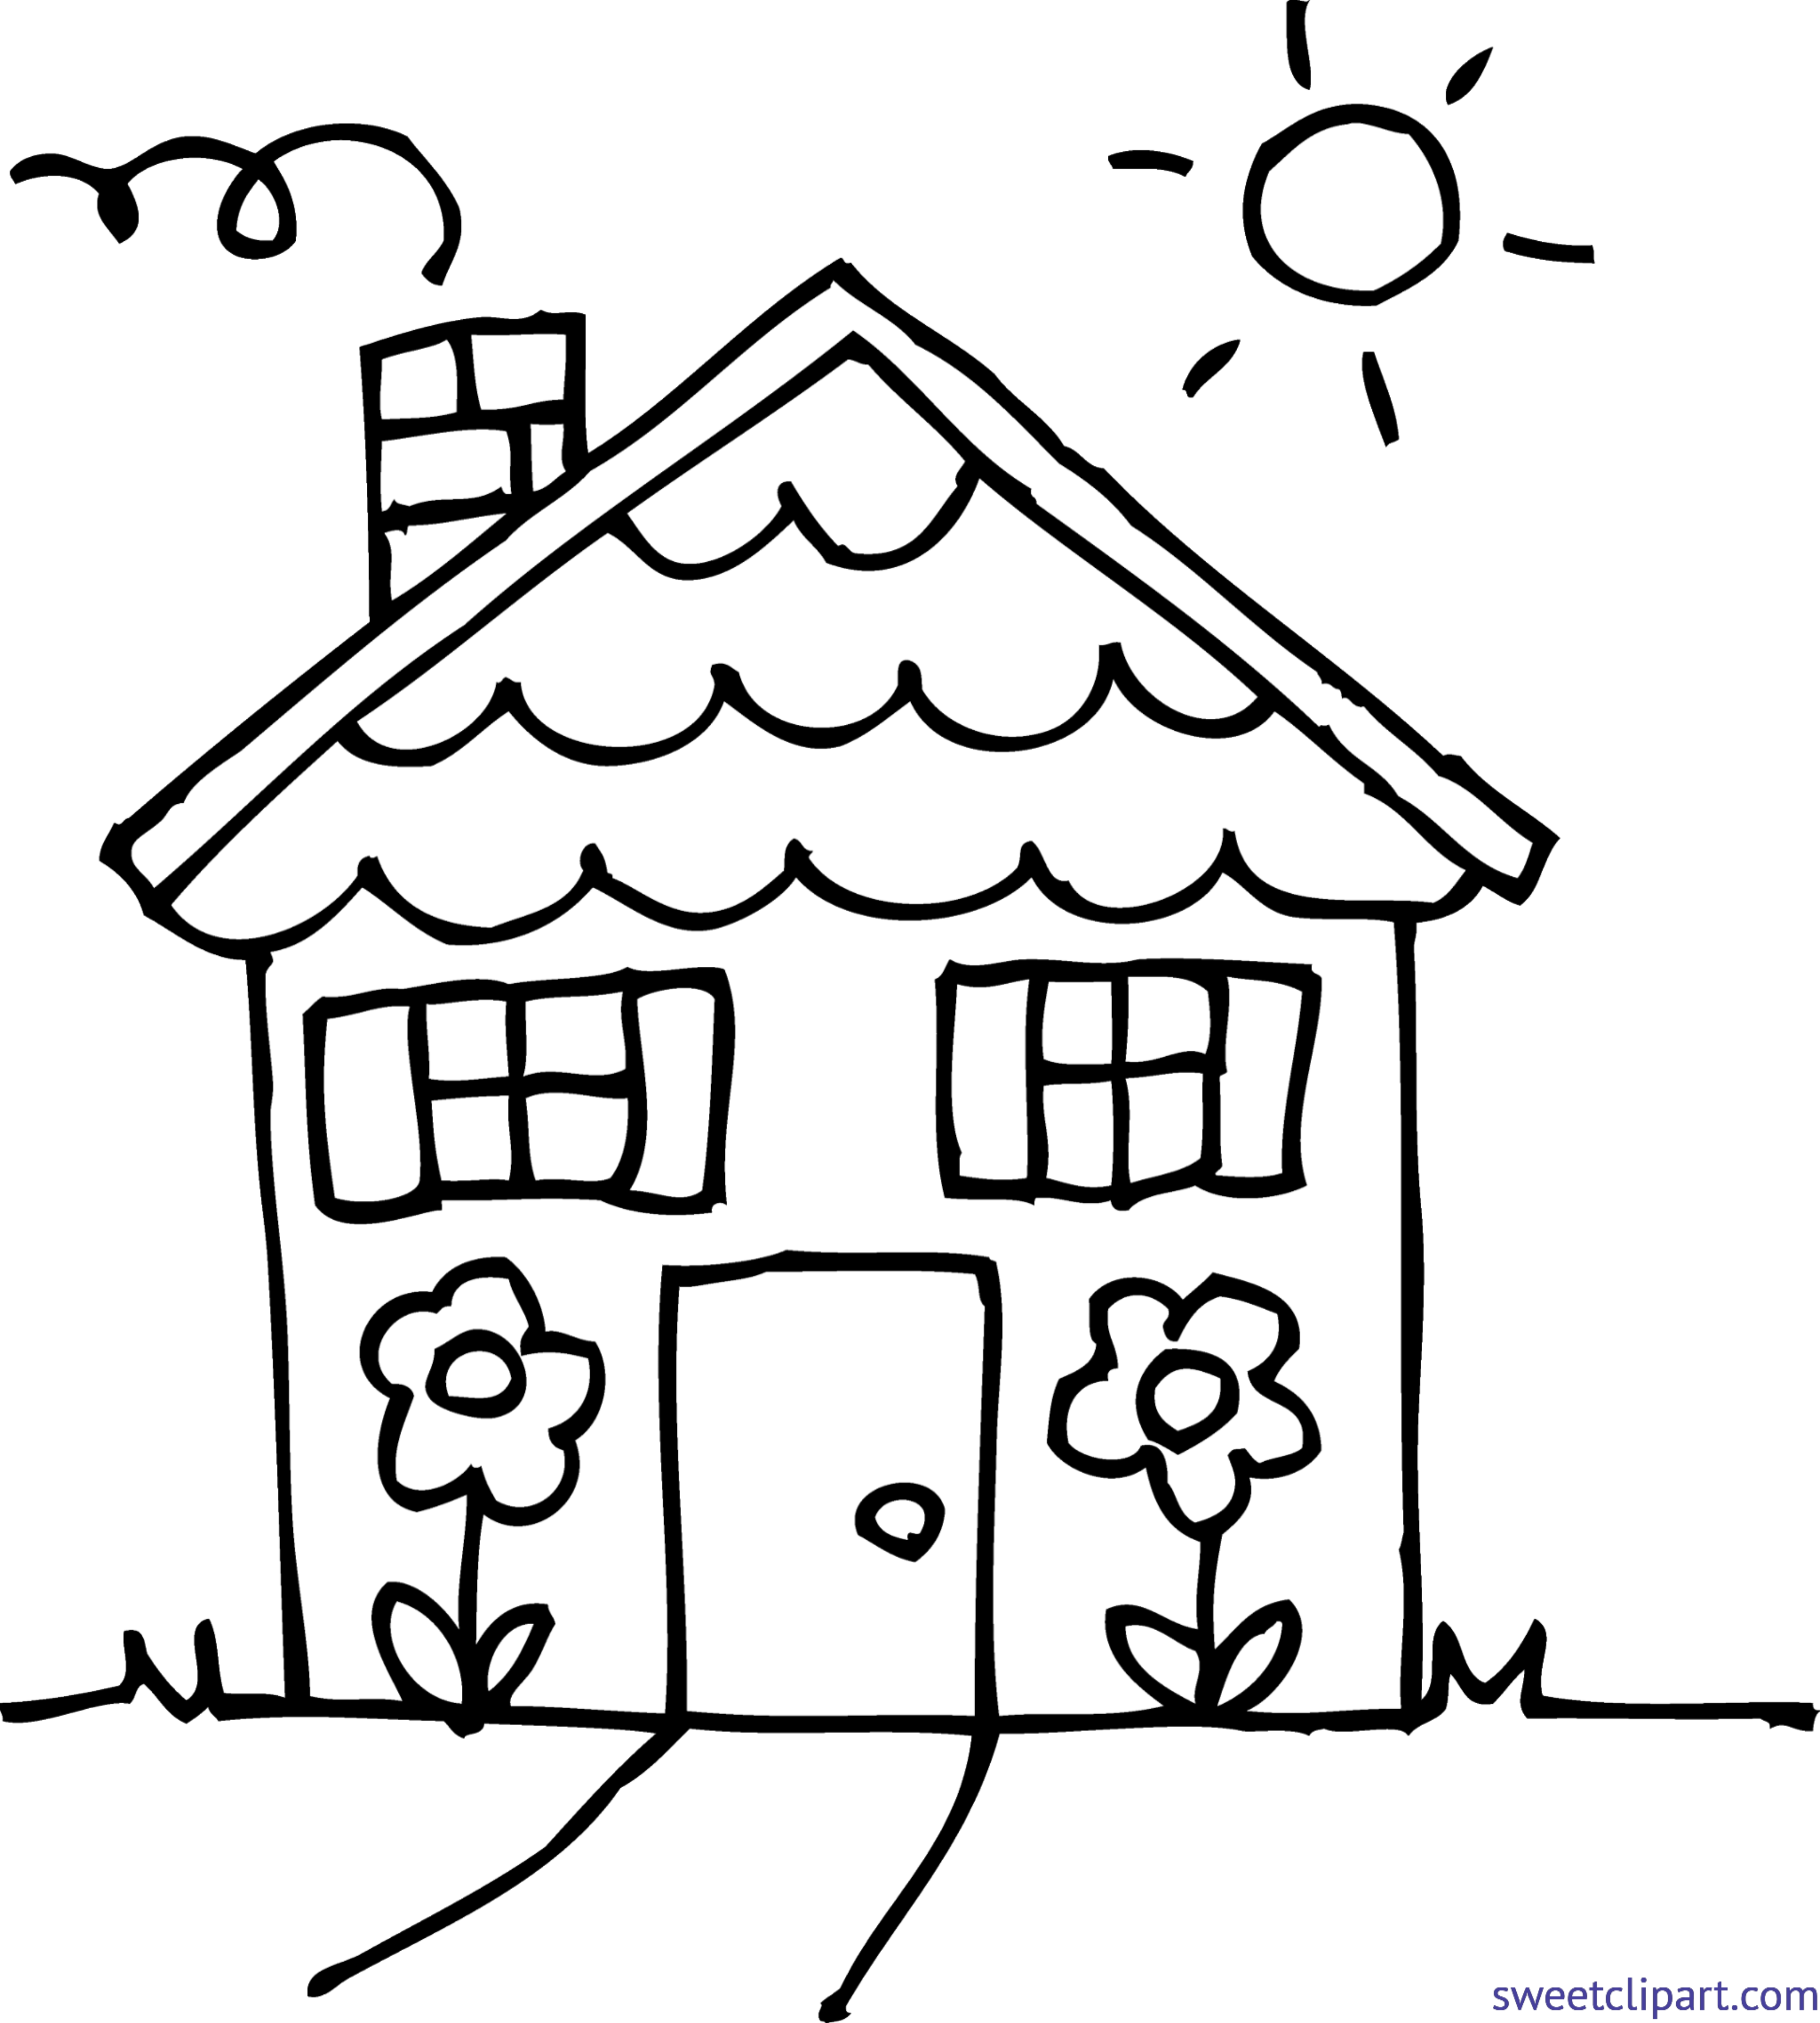 House Line Drawing Clip Art at GetDrawings Free download